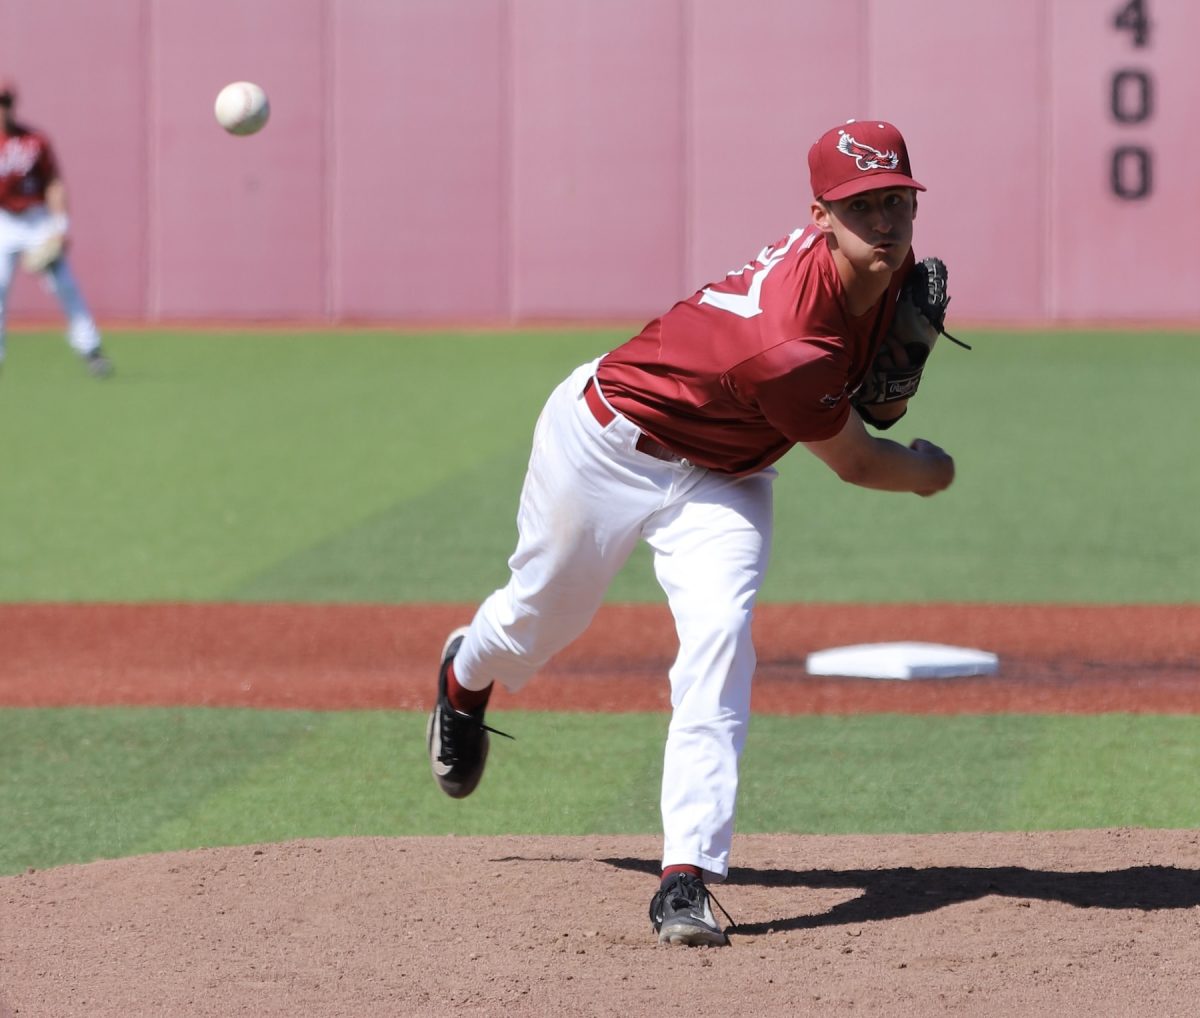 Graduate student Colin Yablonski pitches against Delaware, April 23. PHOTO: LEAH CATLYN ’27/THE HAWK